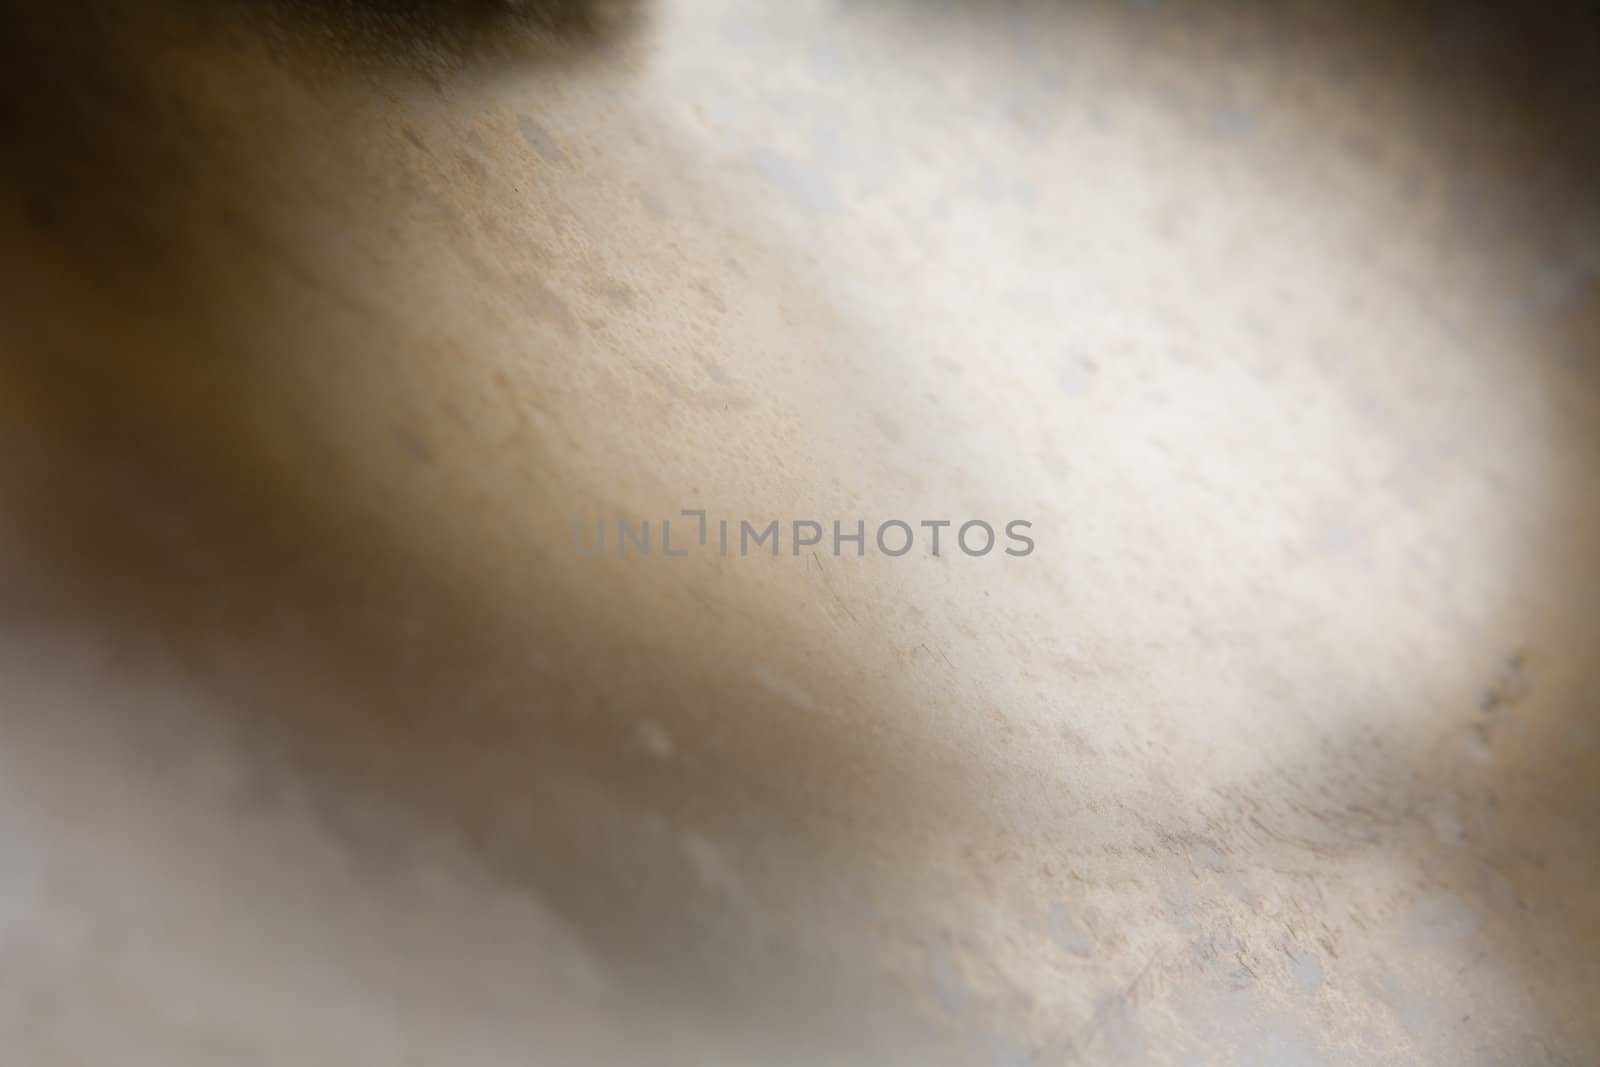 Abstract metal surface background